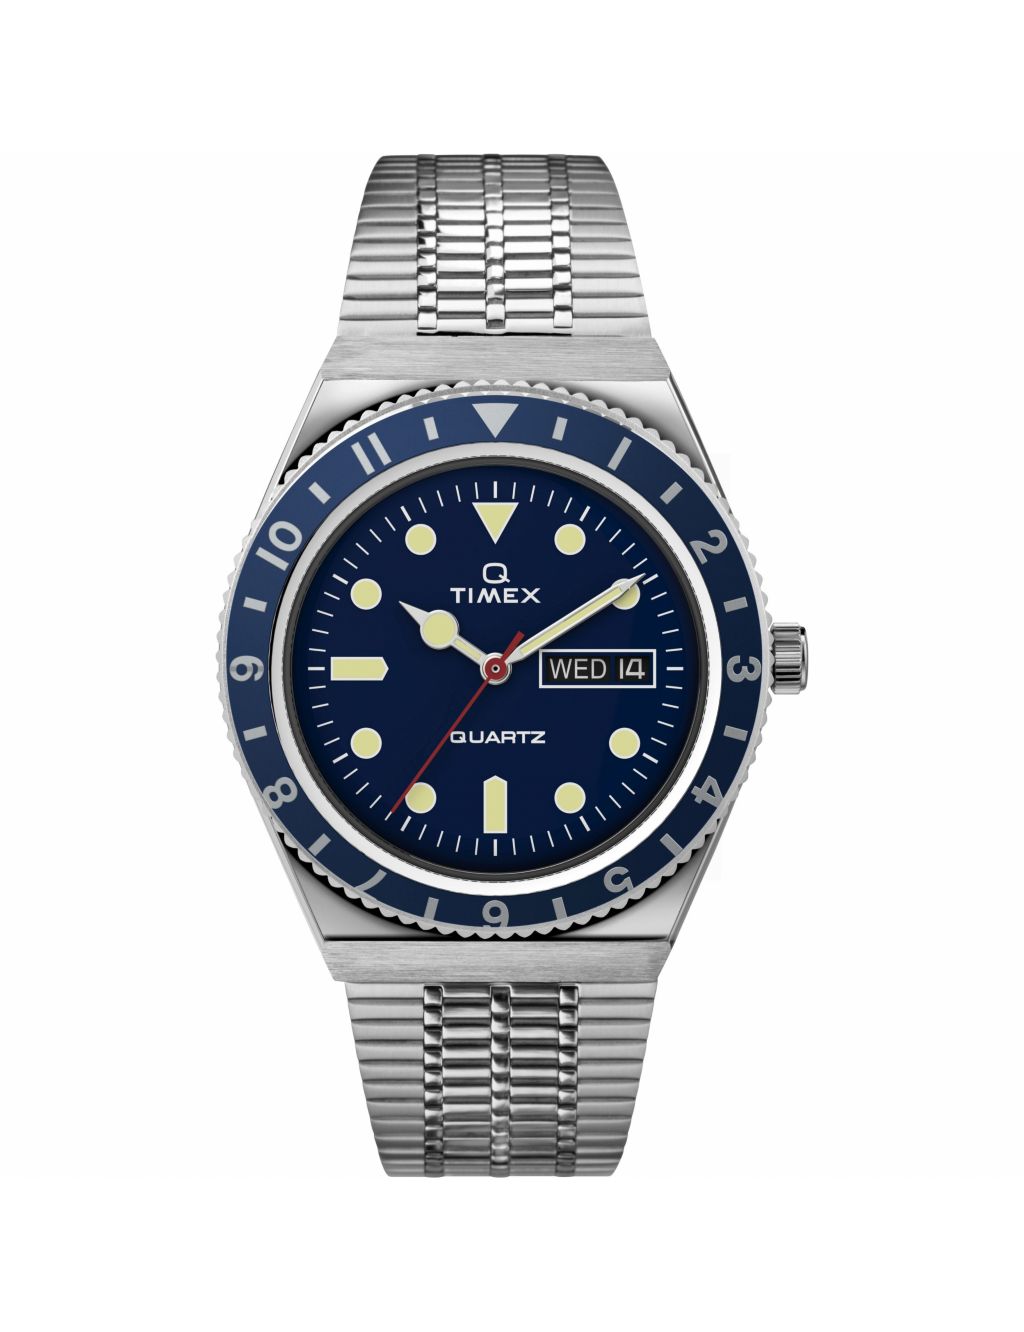 Timex Q Diver Stainless Steel Watch image 1